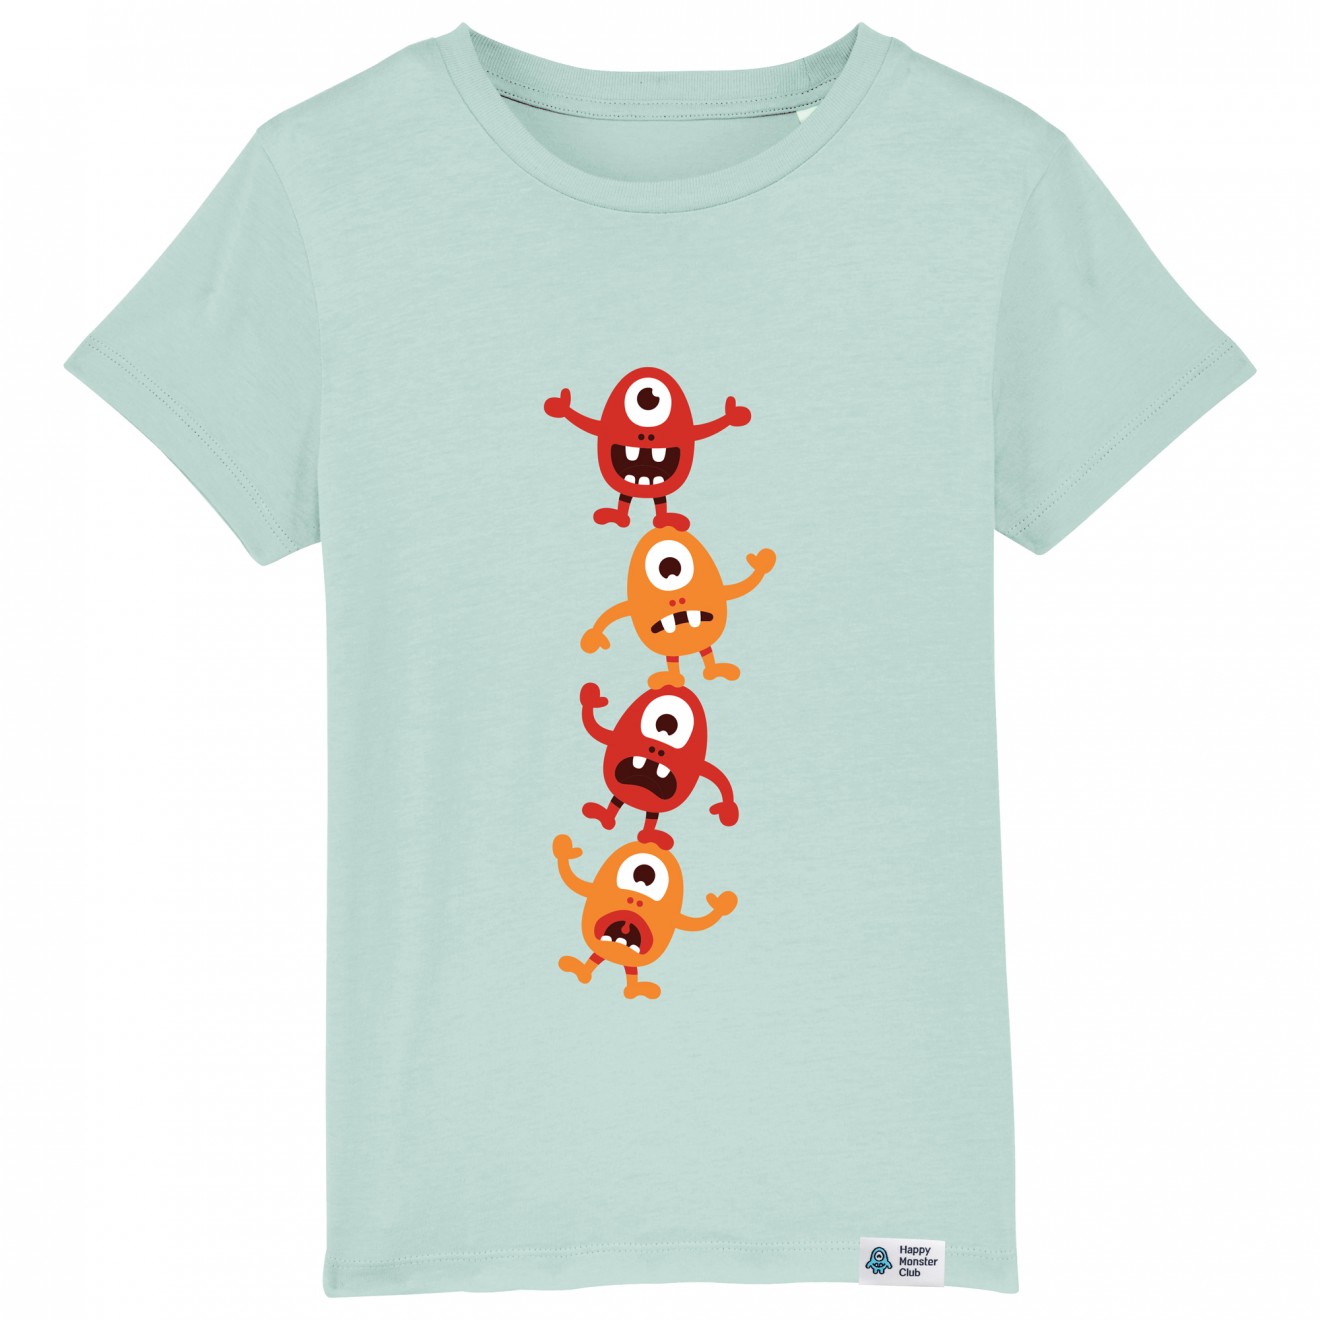 Image of the product Happy monster tower, from the product category T-shirts